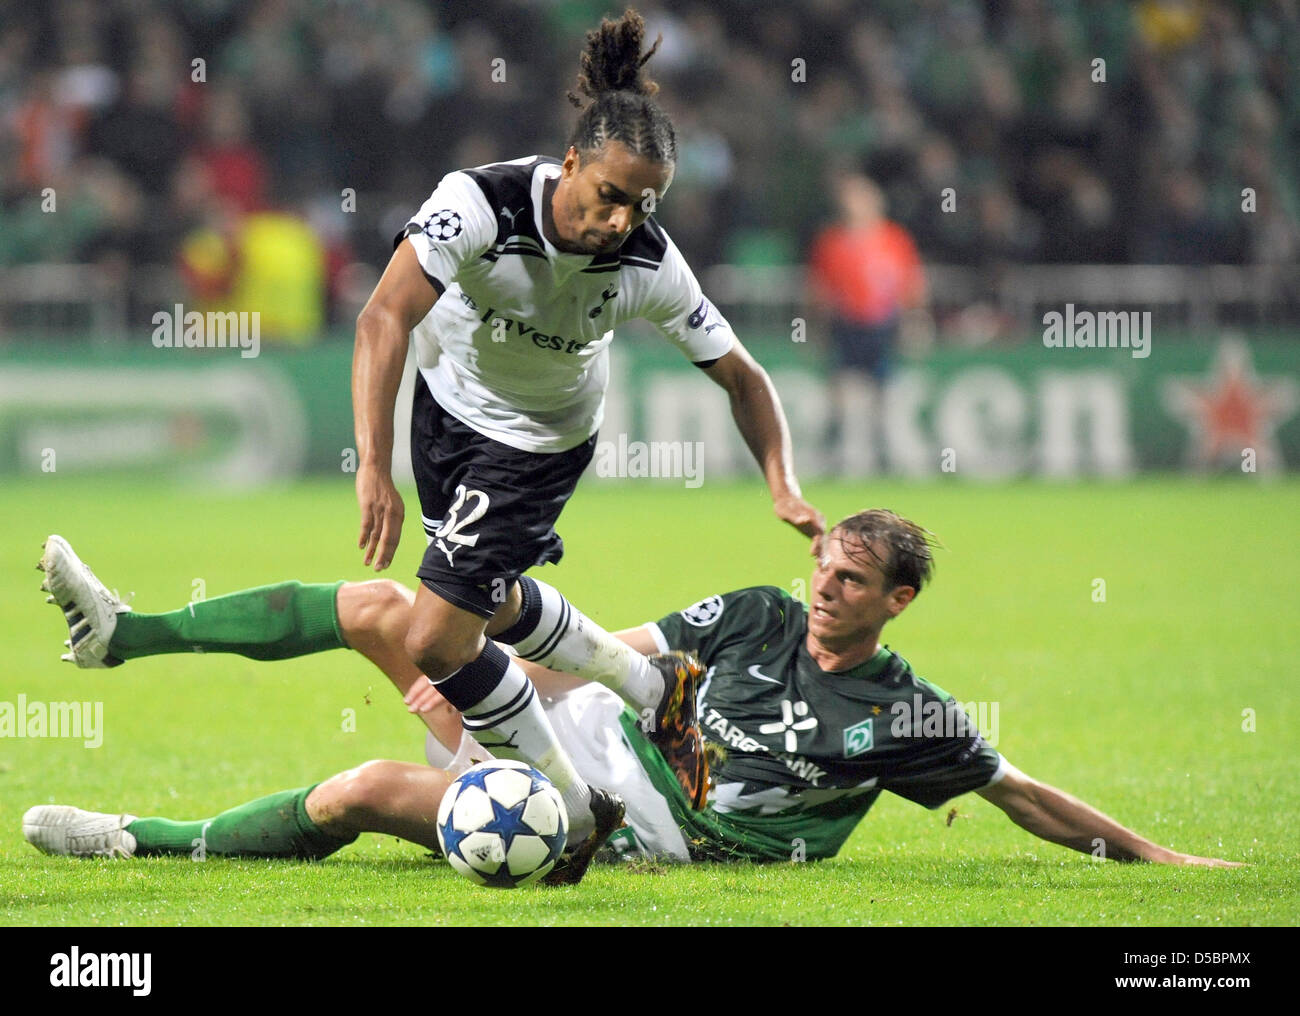 Werder Bremen faces Tottenham Hotspur in the Champions League Group A at the Weser Stadiun in Bremen, Germany, 14 September 2010. Bremen's Tim Borowski (R) vies for the ball with Tottenham's Benoit Assou-Ekotto. Photo: Ingo Wagner Stock Photo